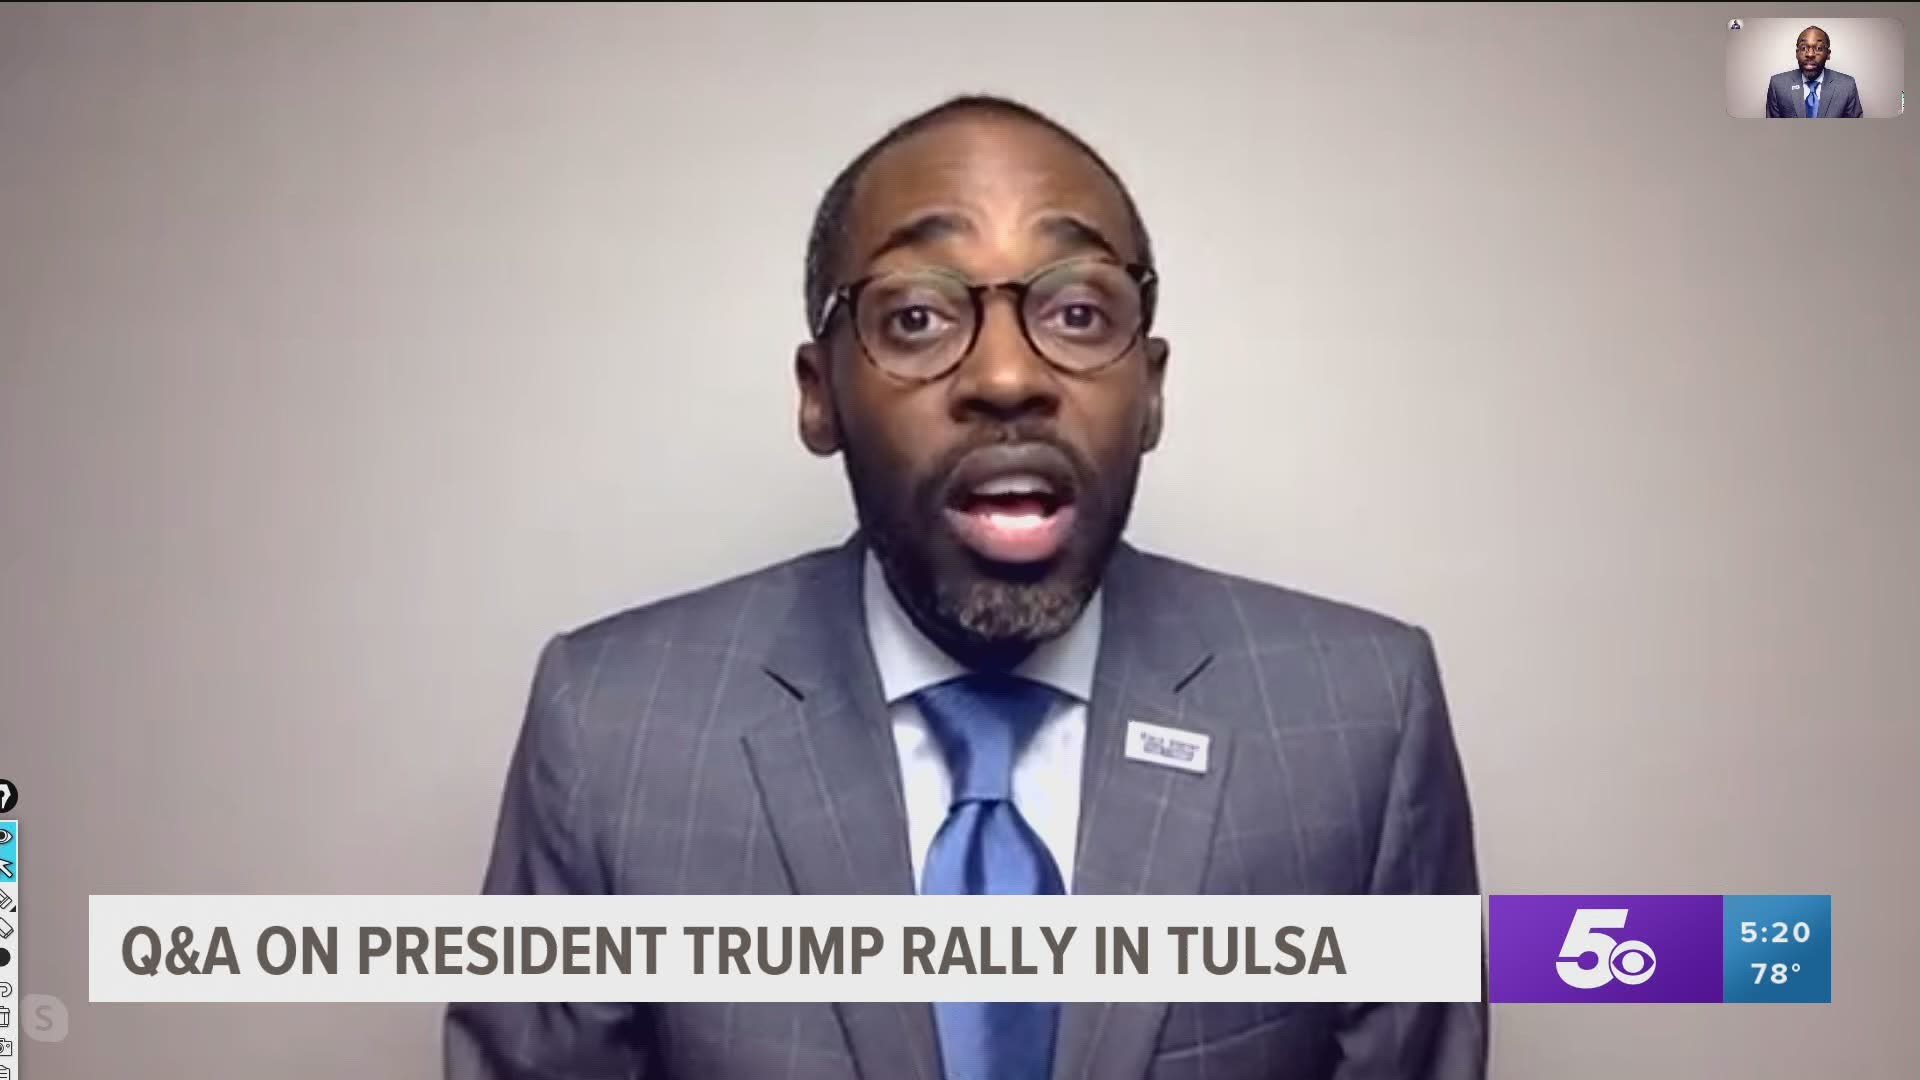 5NEWS talks with RNC advisor about upcoming Trump rally in Tulsa